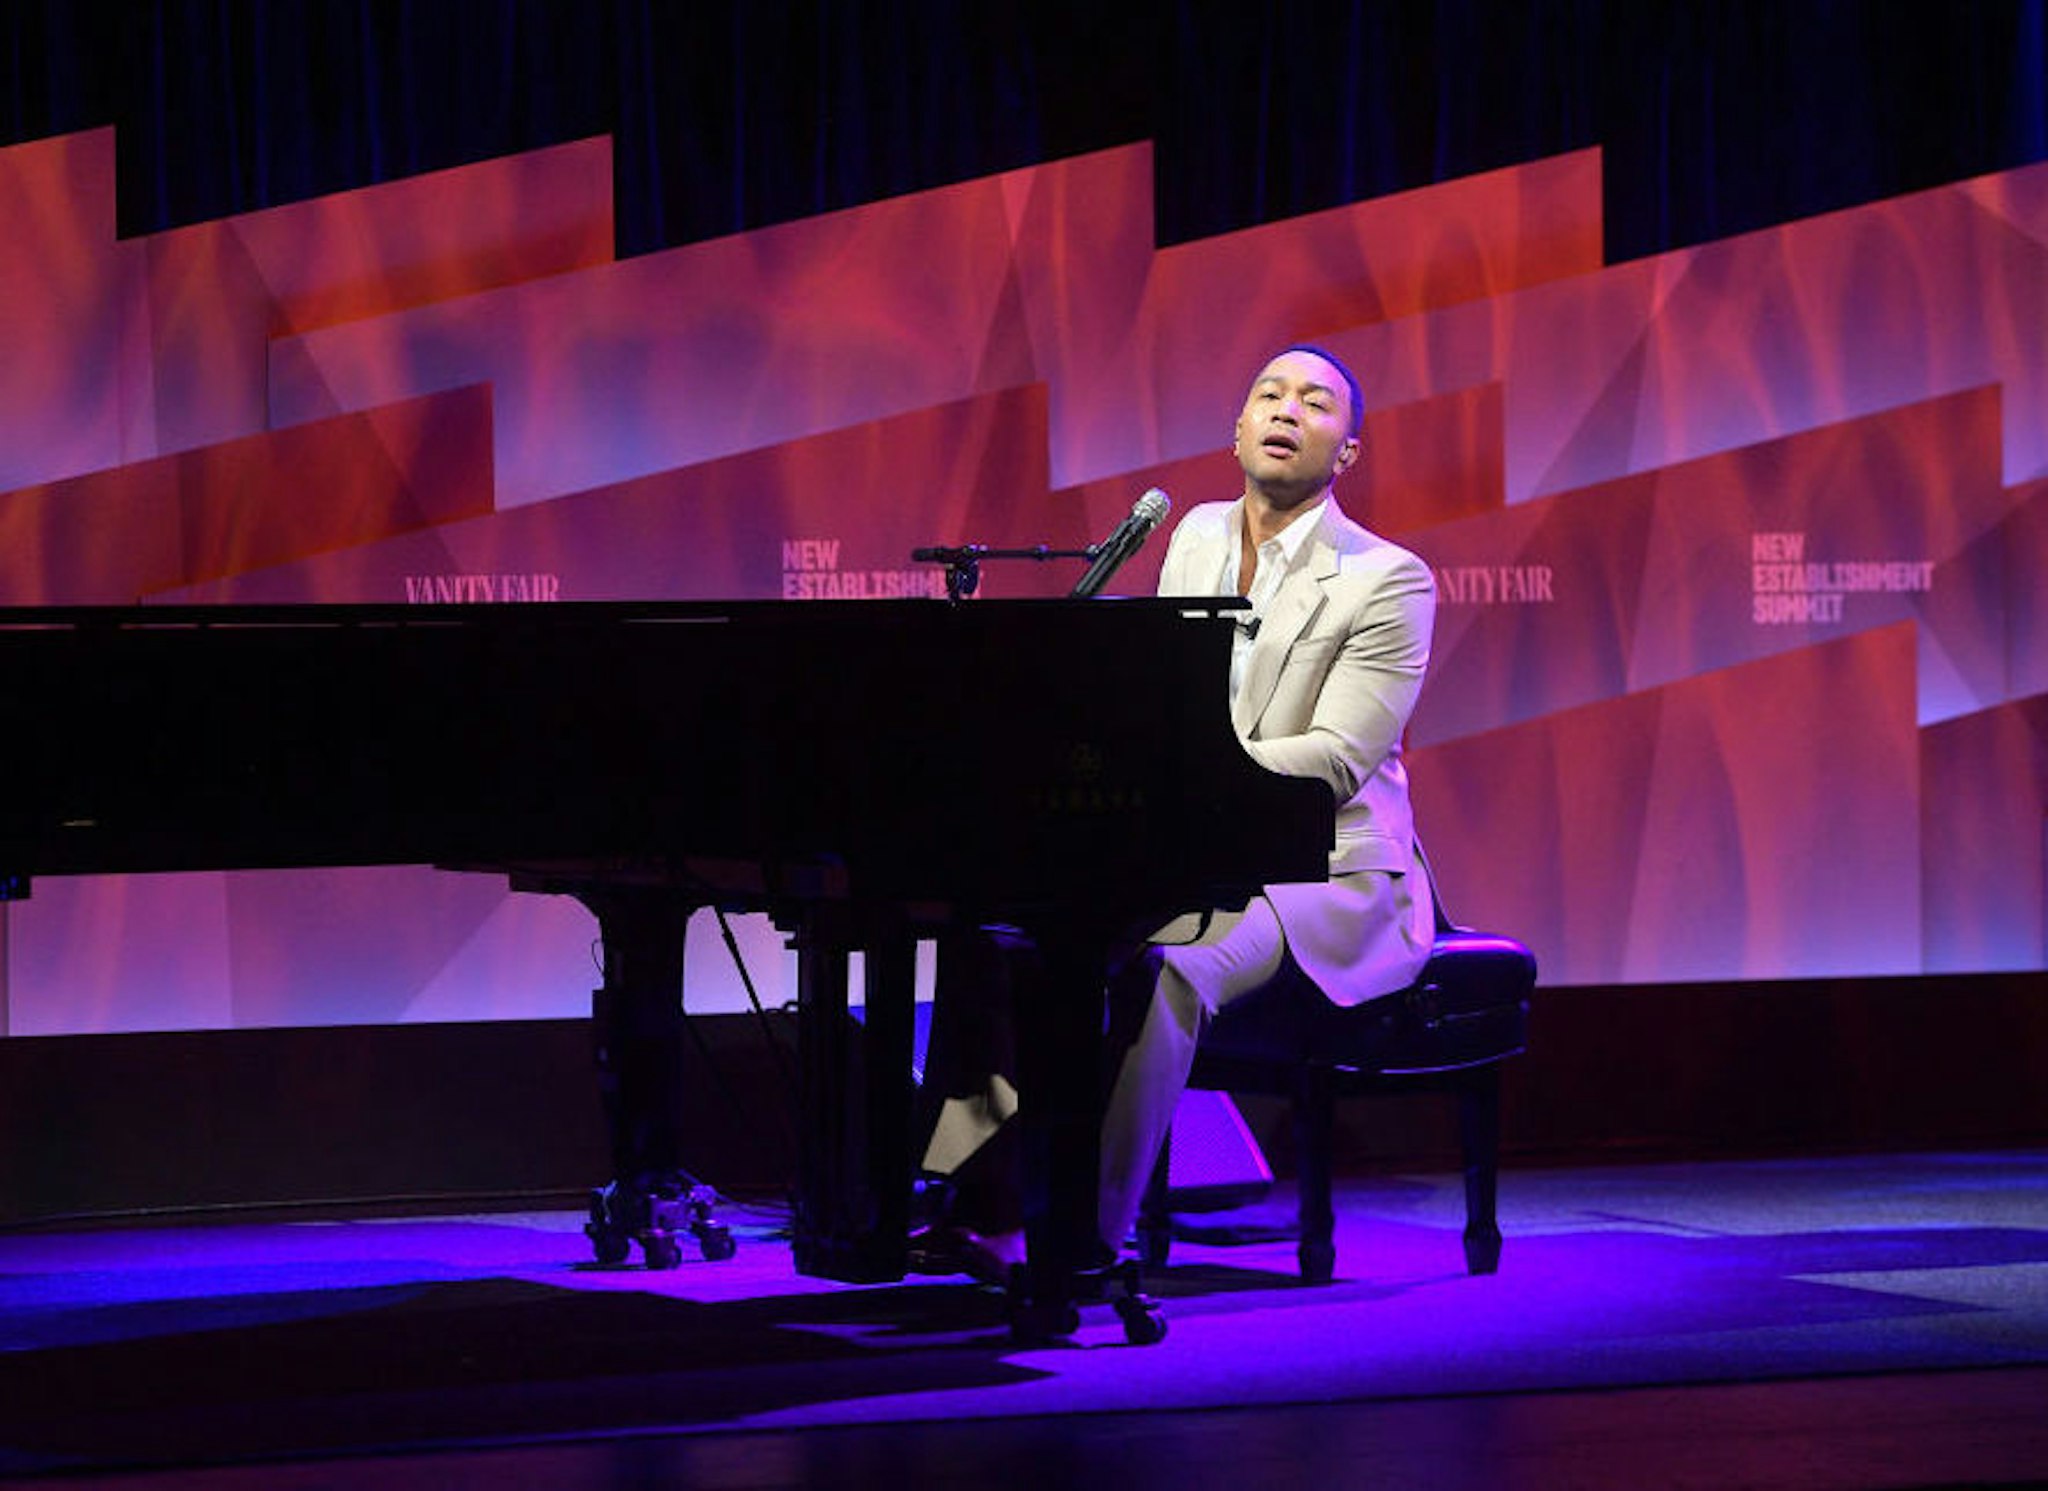 BEVERLY HILLS, CALIFORNIA - OCTOBER 22: John Legend performs onstage at Vanity Fair's 6th Annual New Establishment Summit at Wallis Annenberg Center for the Performing Arts on October 22, 2019 in Beverly Hills, California.